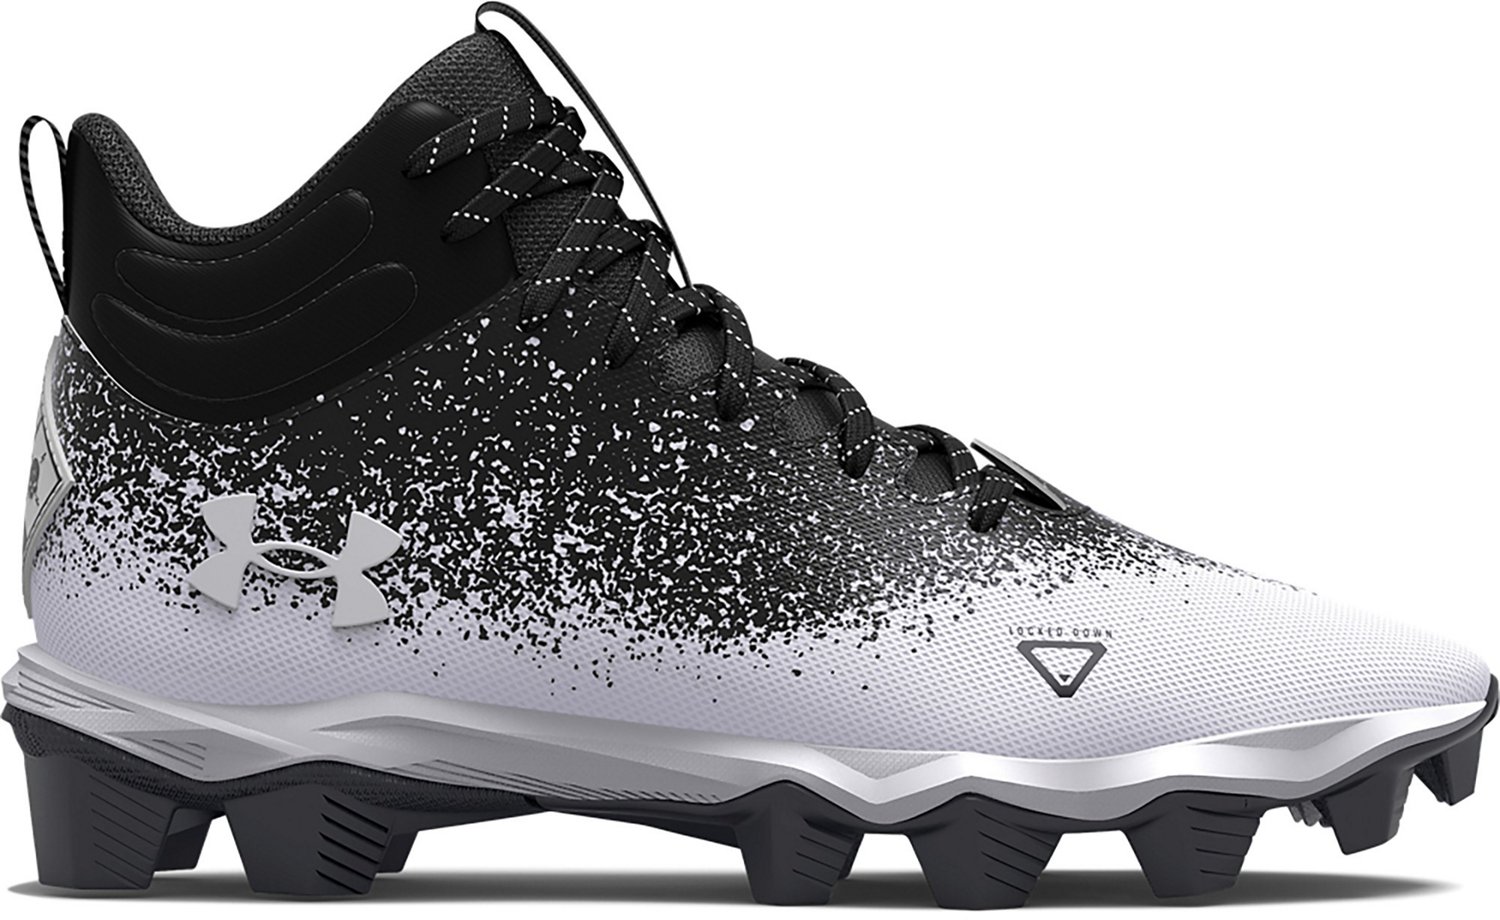 Under Armour Youth Spotlight Franchise 2.0 Jr Football Cleats